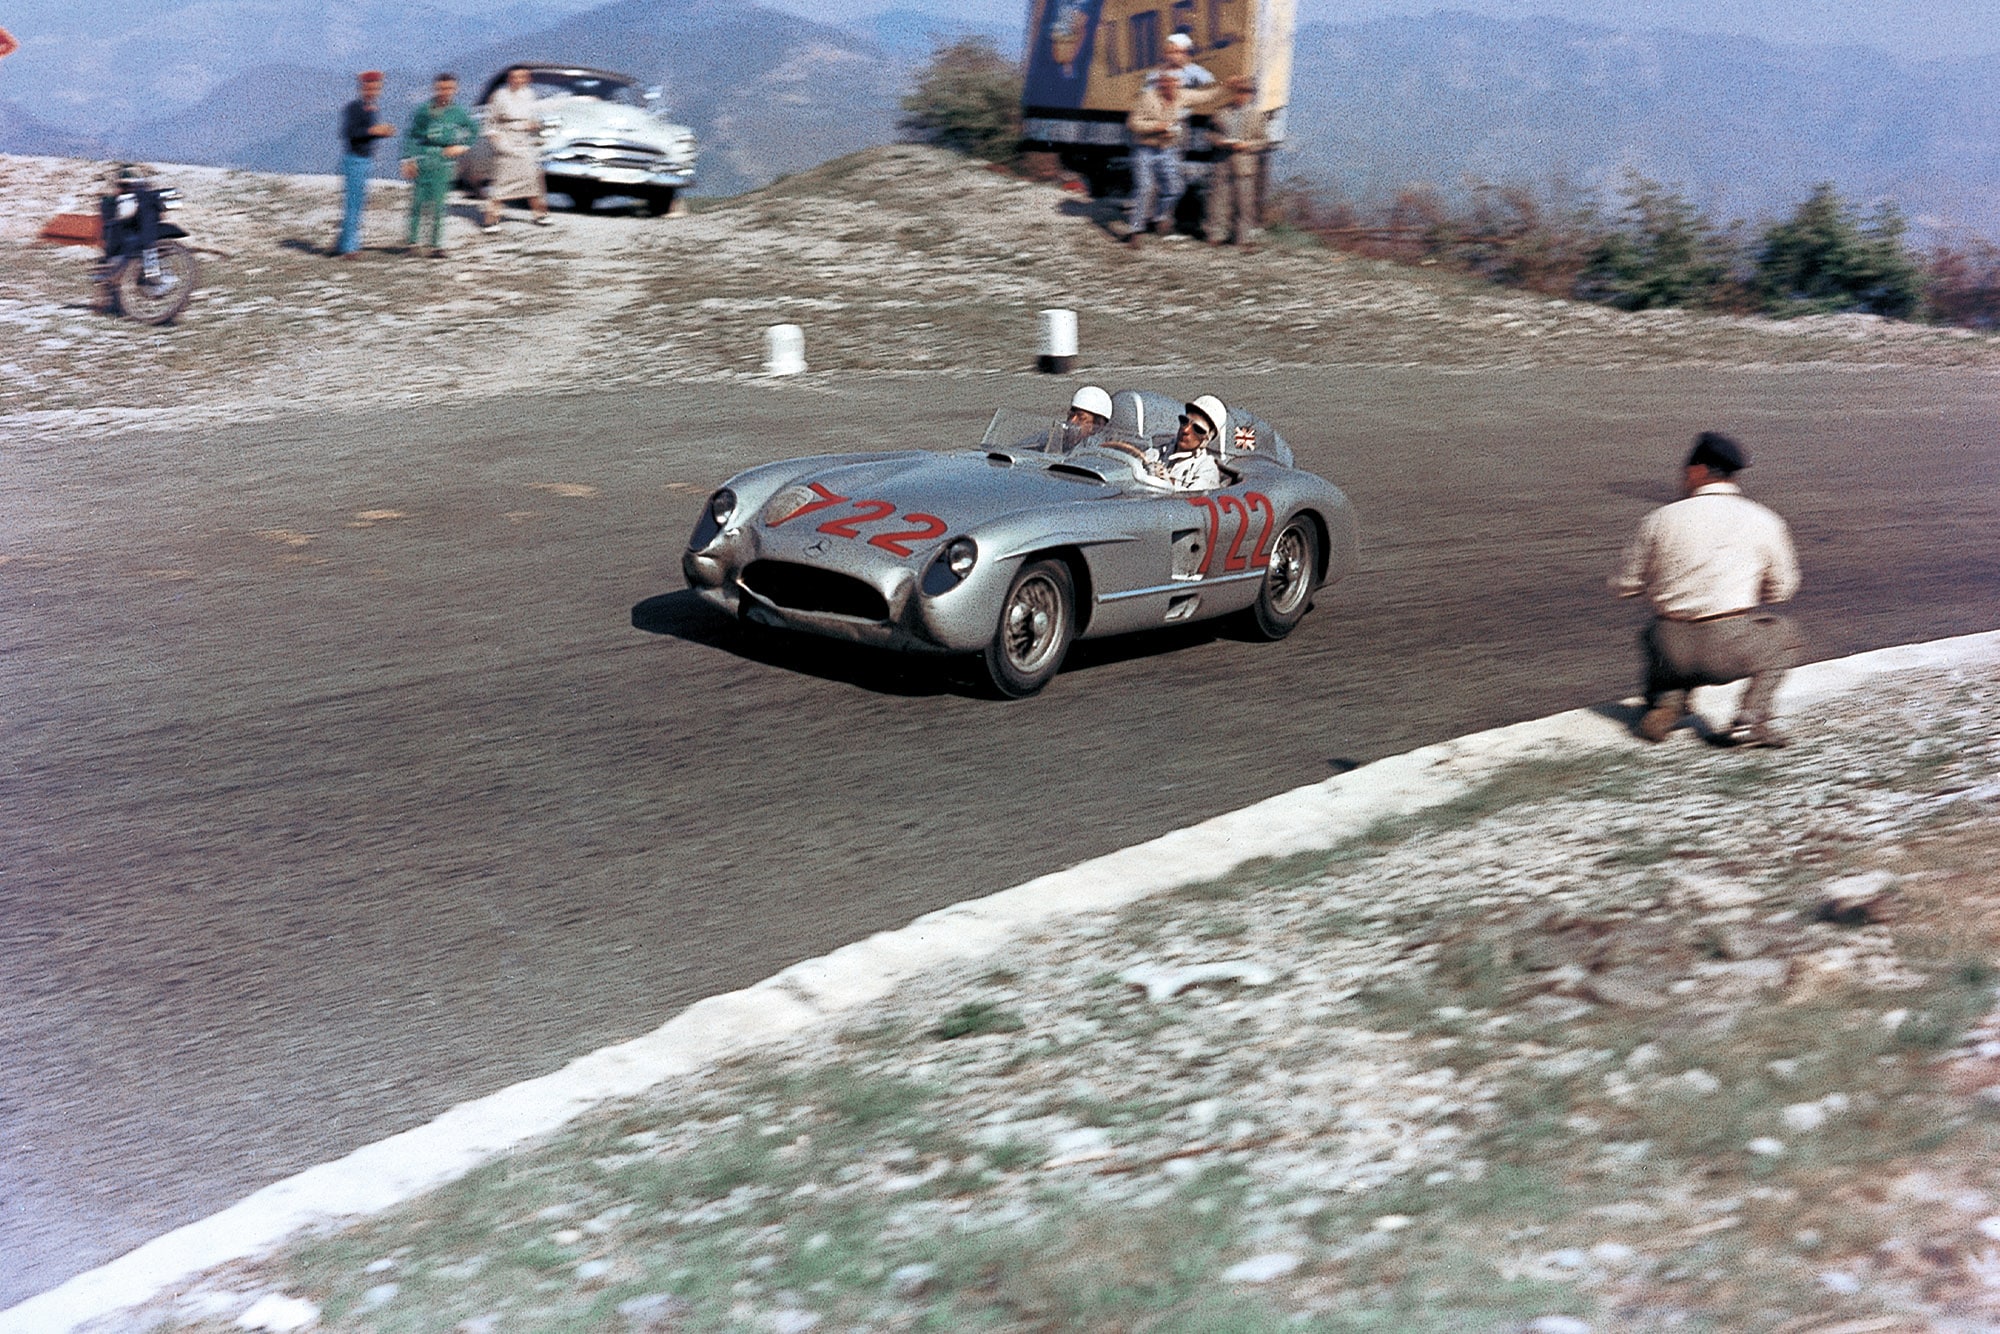 Stirling Moss at high speed in the 1955 Mille Miglia